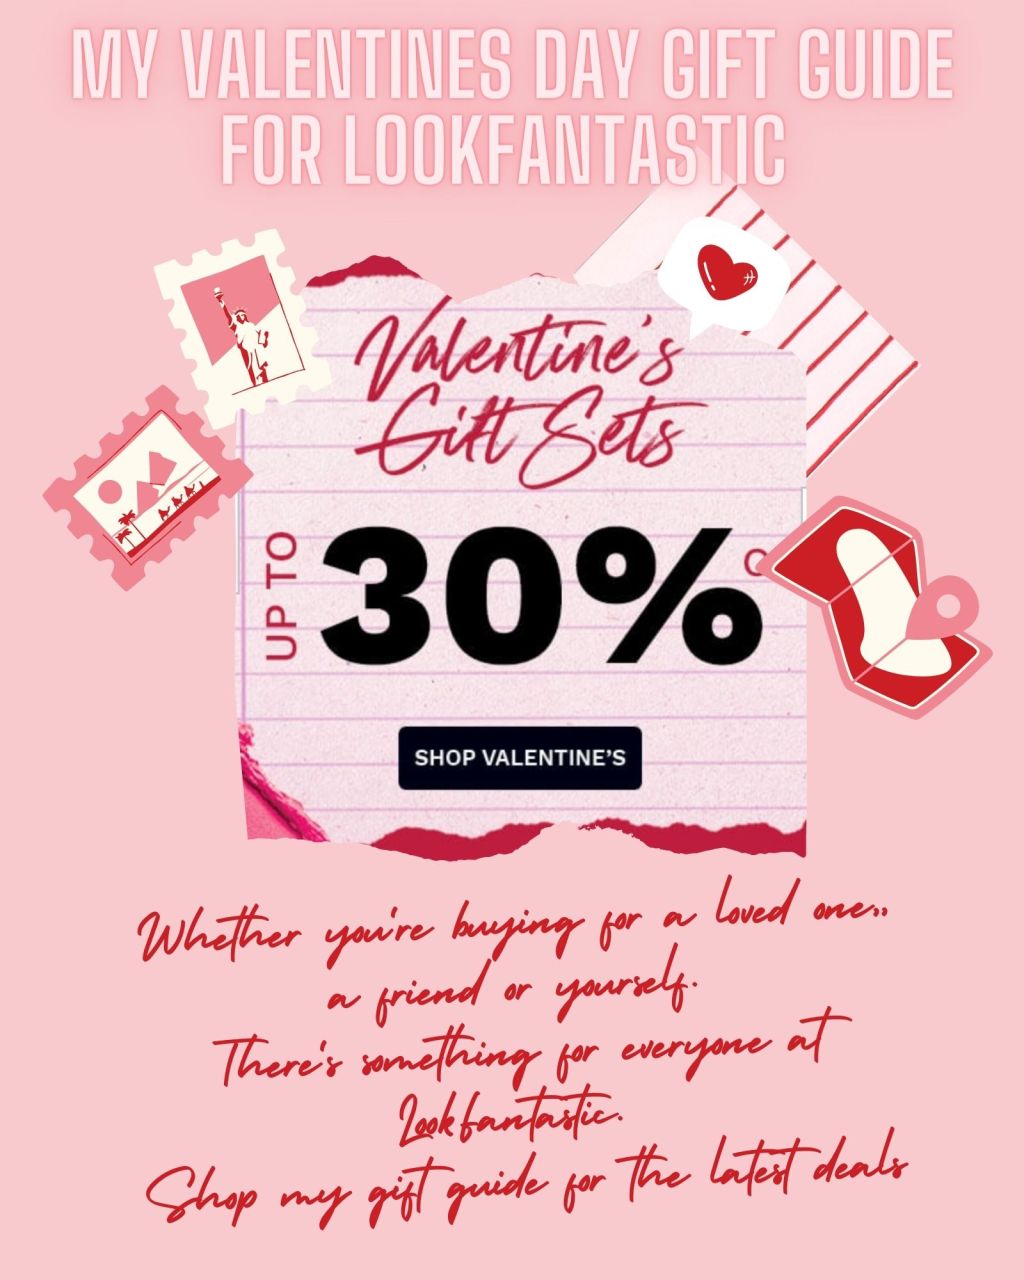 Ad/ LookFantastic: Valentines Day Gift Guide